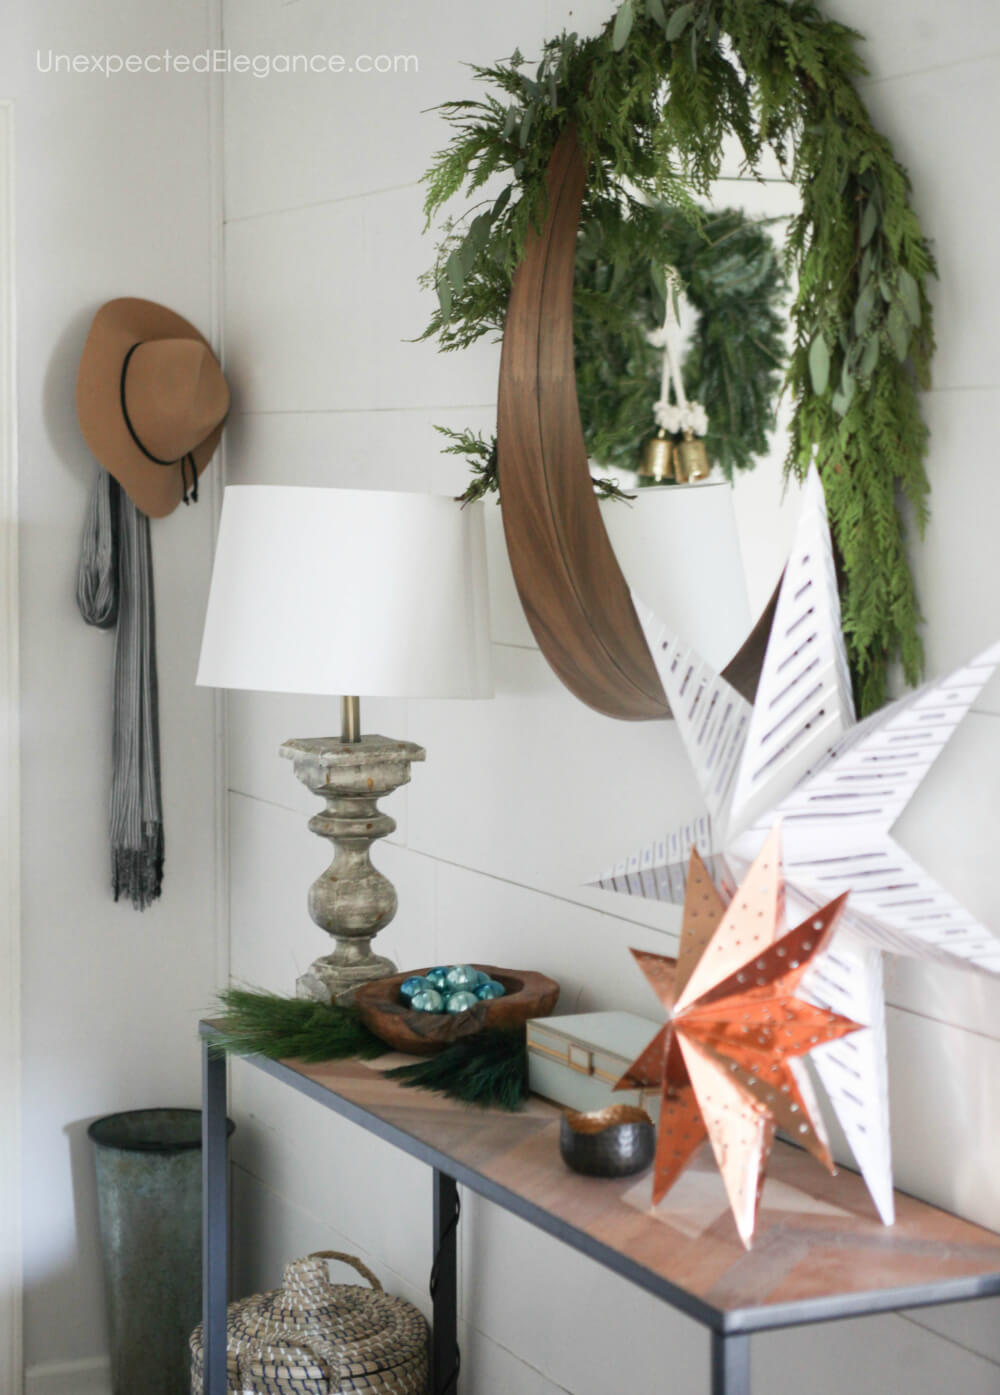 Festive holiday decor that is simple and easy!